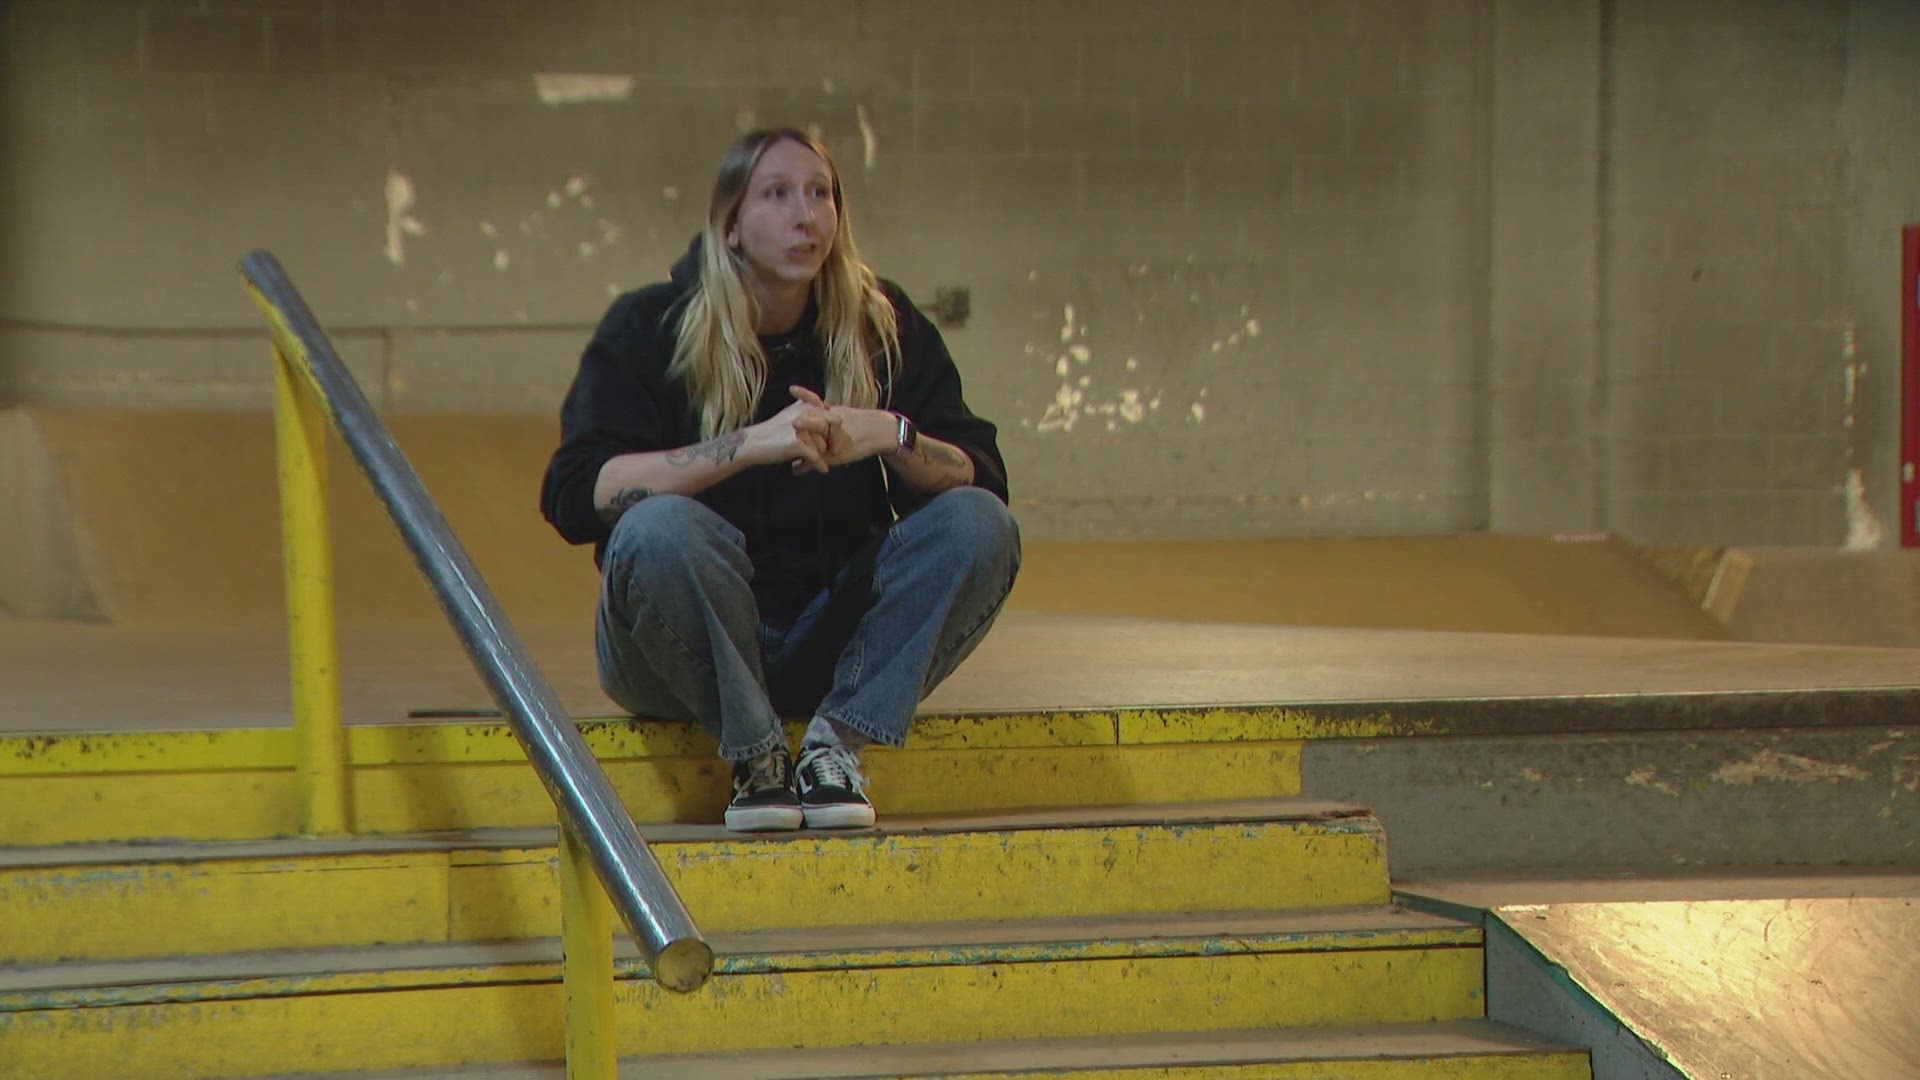 The sport of skateboarding is attracting more women — groups like Girls Skate Denver welcome more women into a traditionally male-dominated sport.